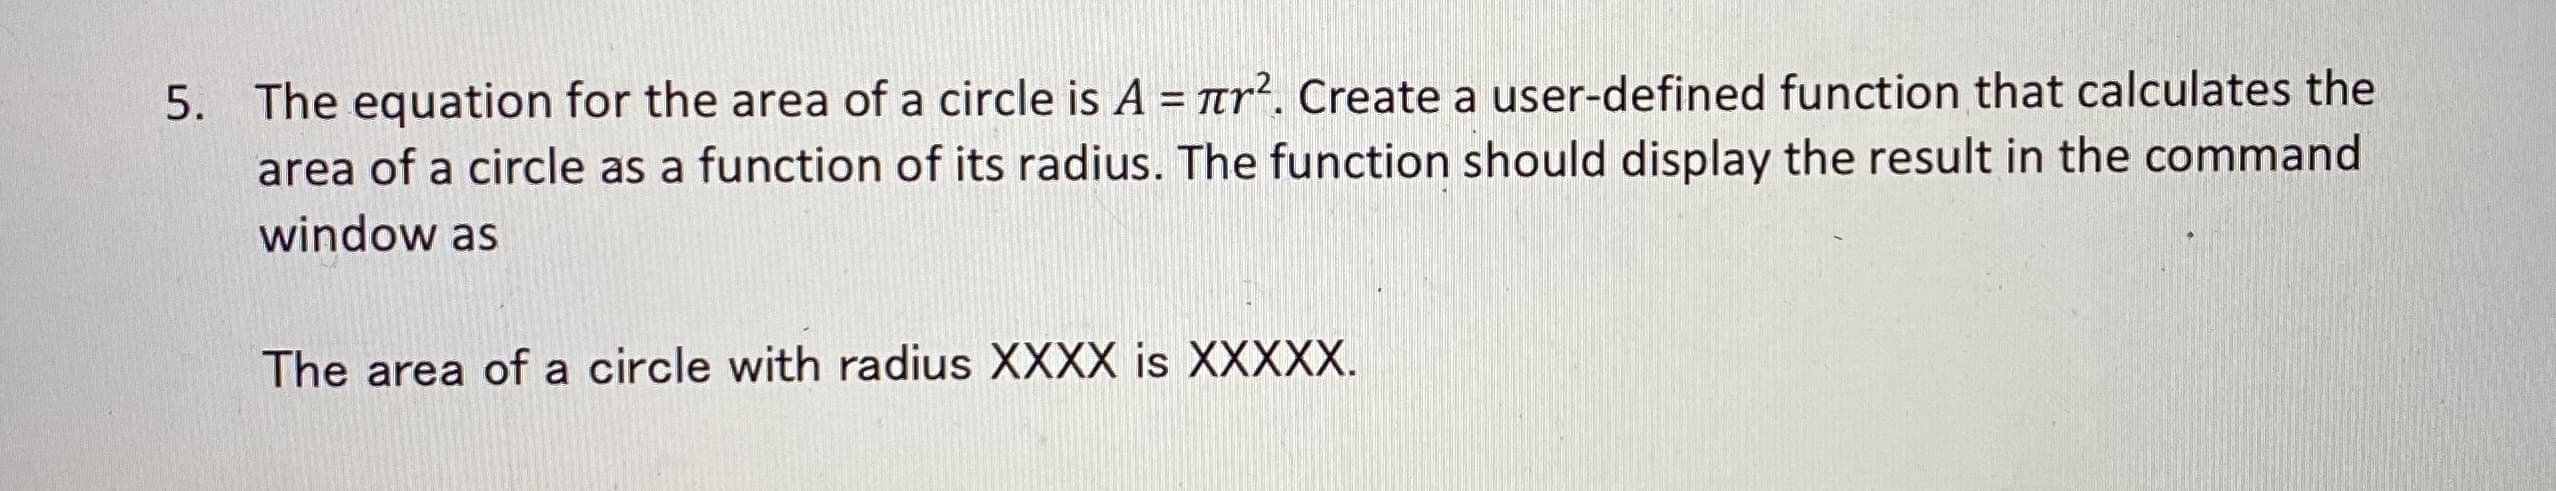 5. The equation for the area of a circle is A = tr². Create a user-defined function that calculates the
area of a circle as a function of its radius. The function should display the result in the command
window as
The area of a circle with radius XXXX is XXXXX.
